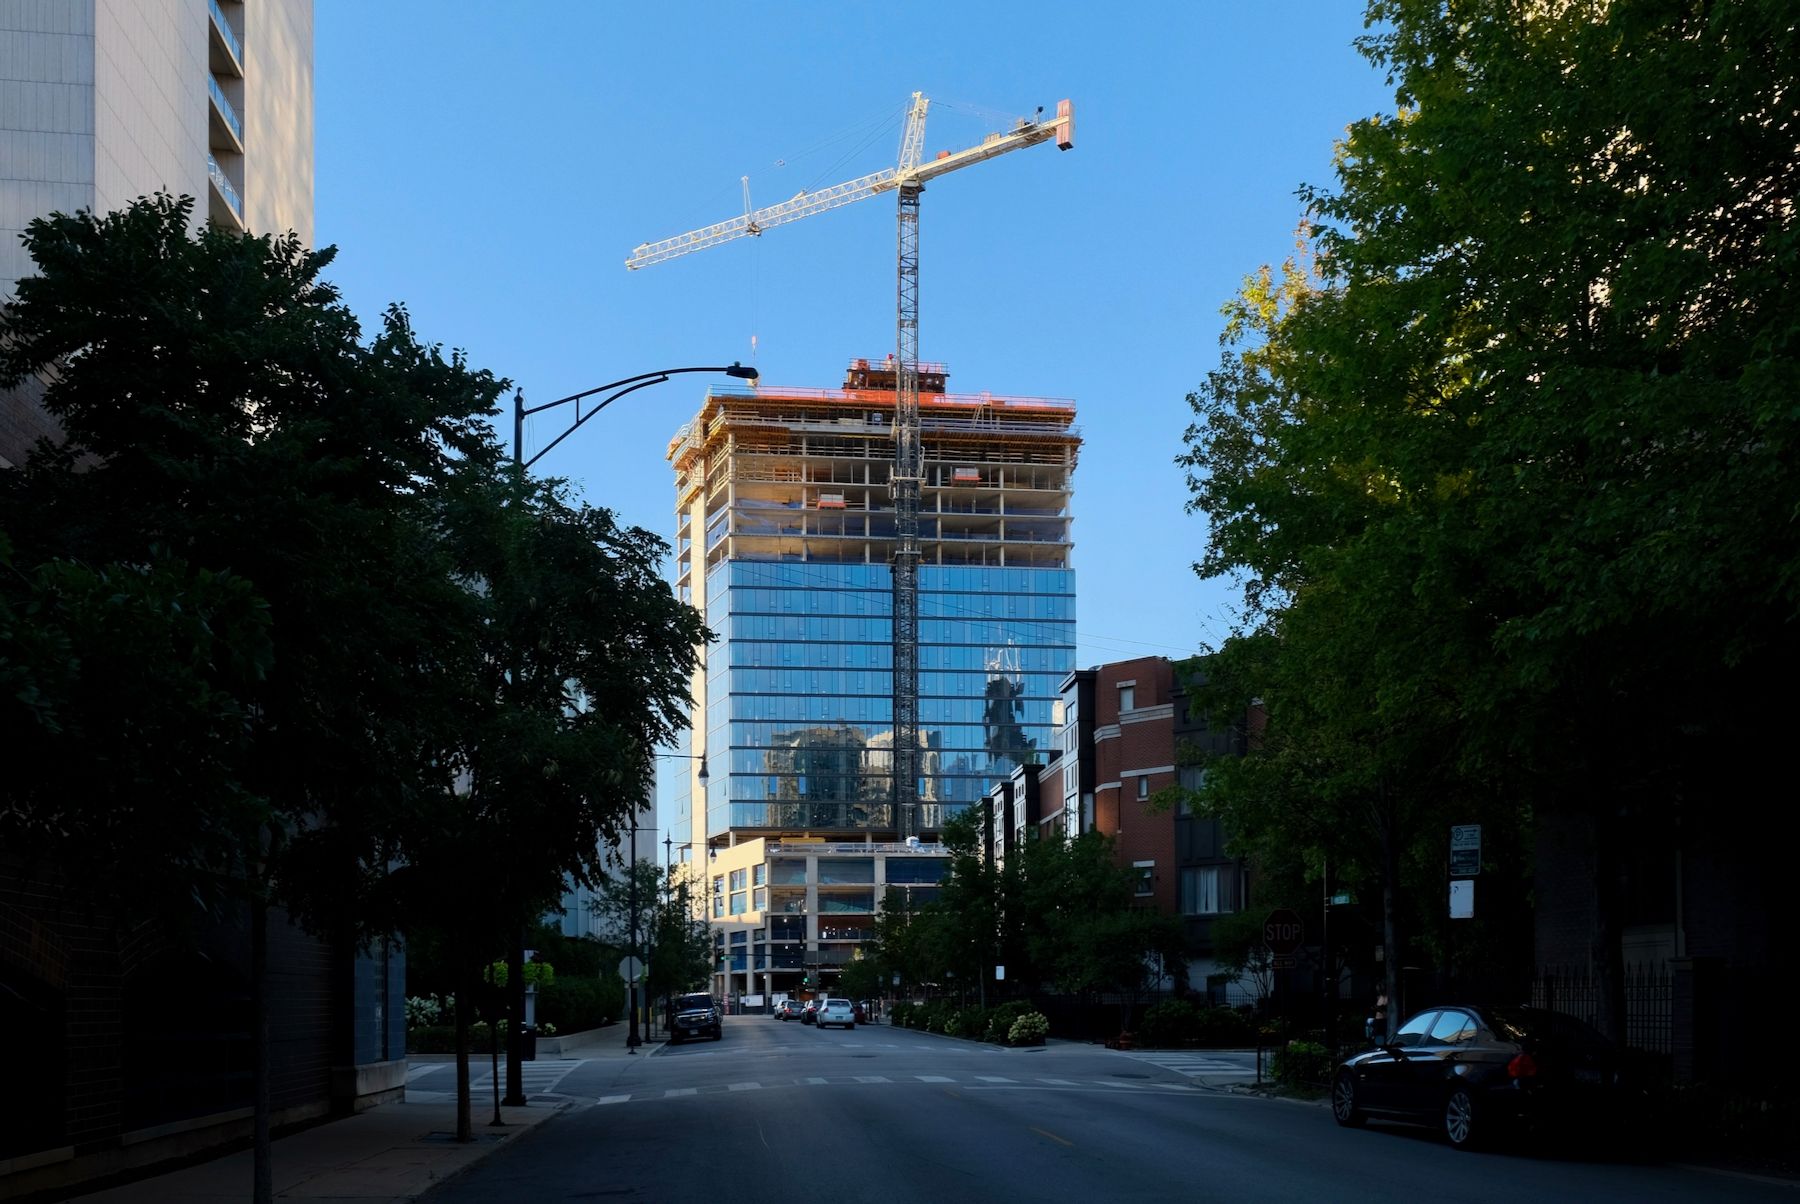 808 N Cleveland Avenue Nears Full Height in Near North Side